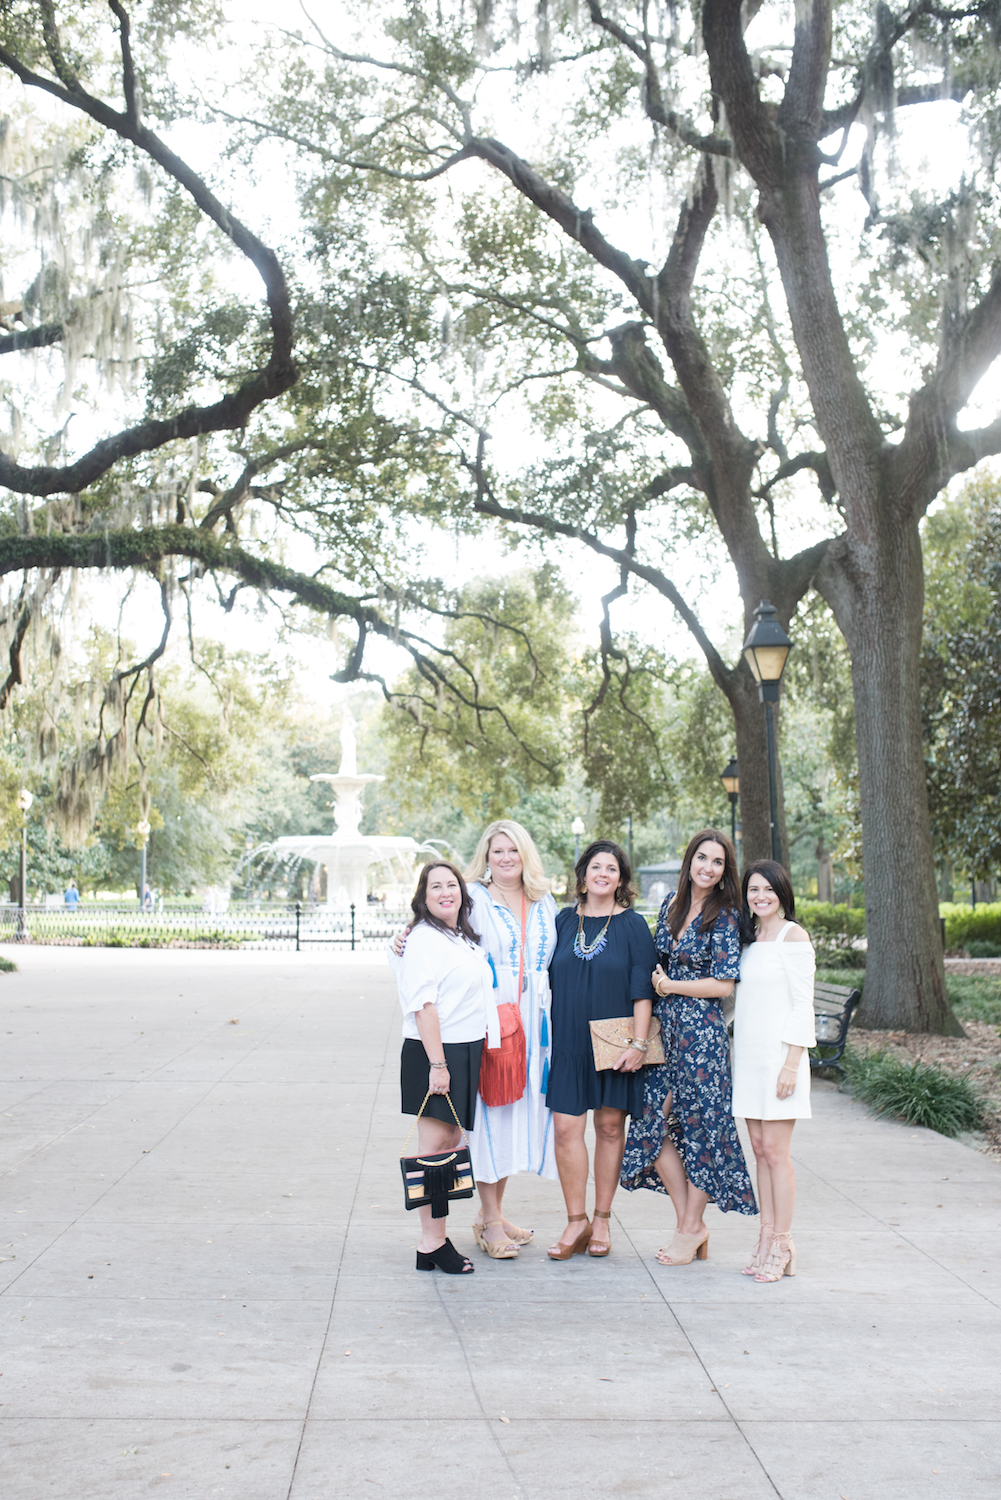 The Southern Coterie blog: "Want to Be a Travel Blogger? Tips on Working with a Visitor's Bureau" by Emily Hines (photo: Kelli Boyd Photography for The Southern C and Visit Savannah)